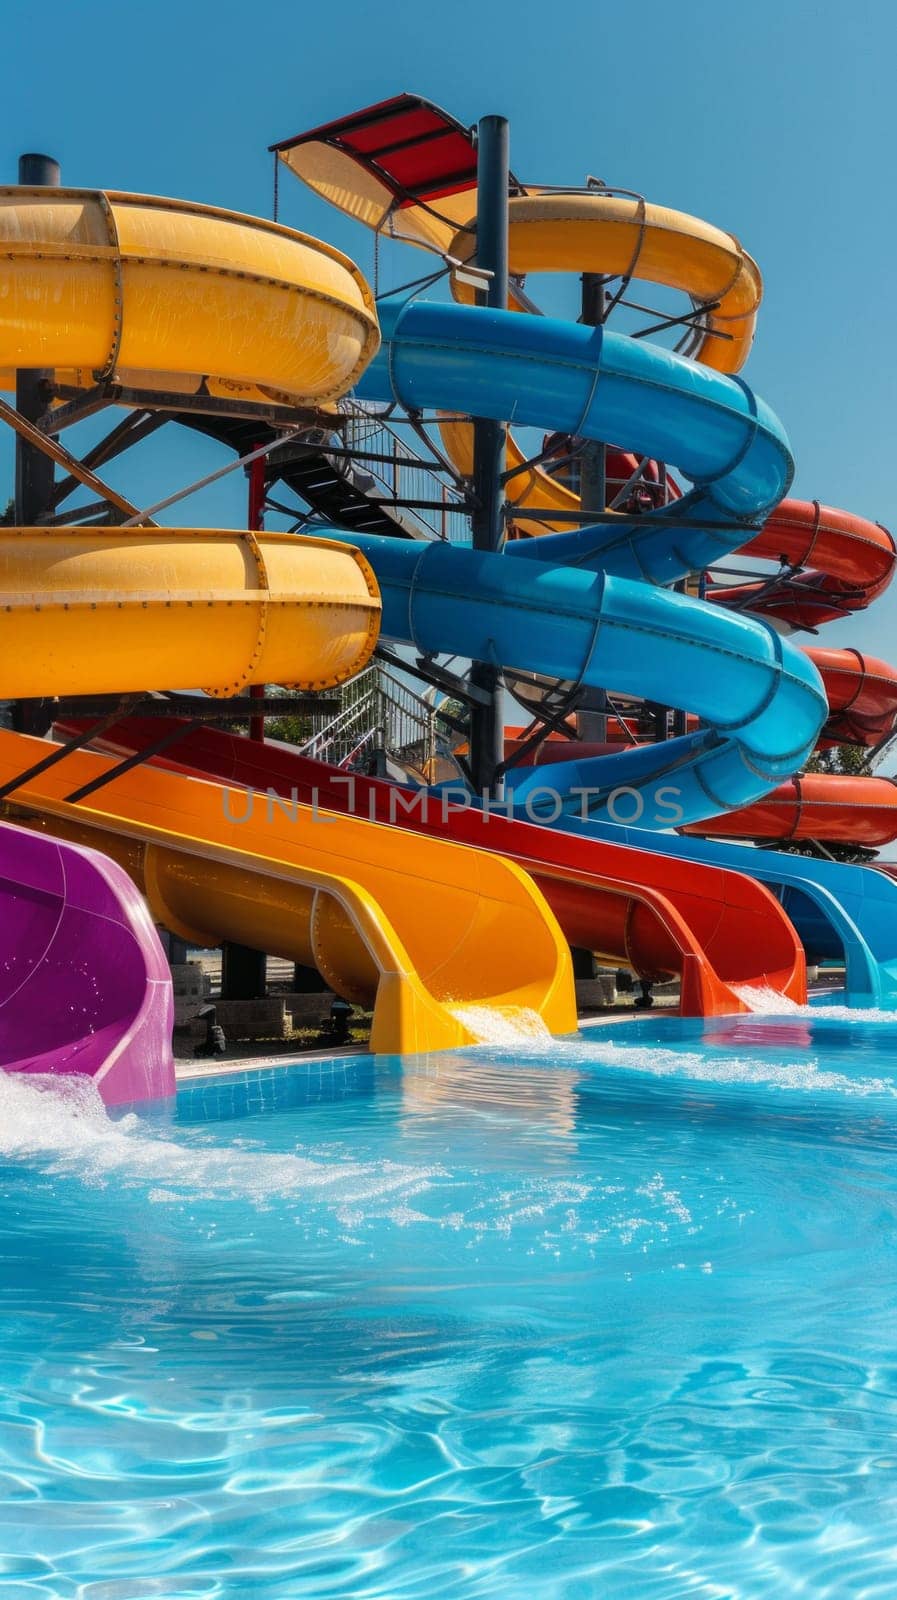 A water slide with many different colored slides in a pool by papatonic